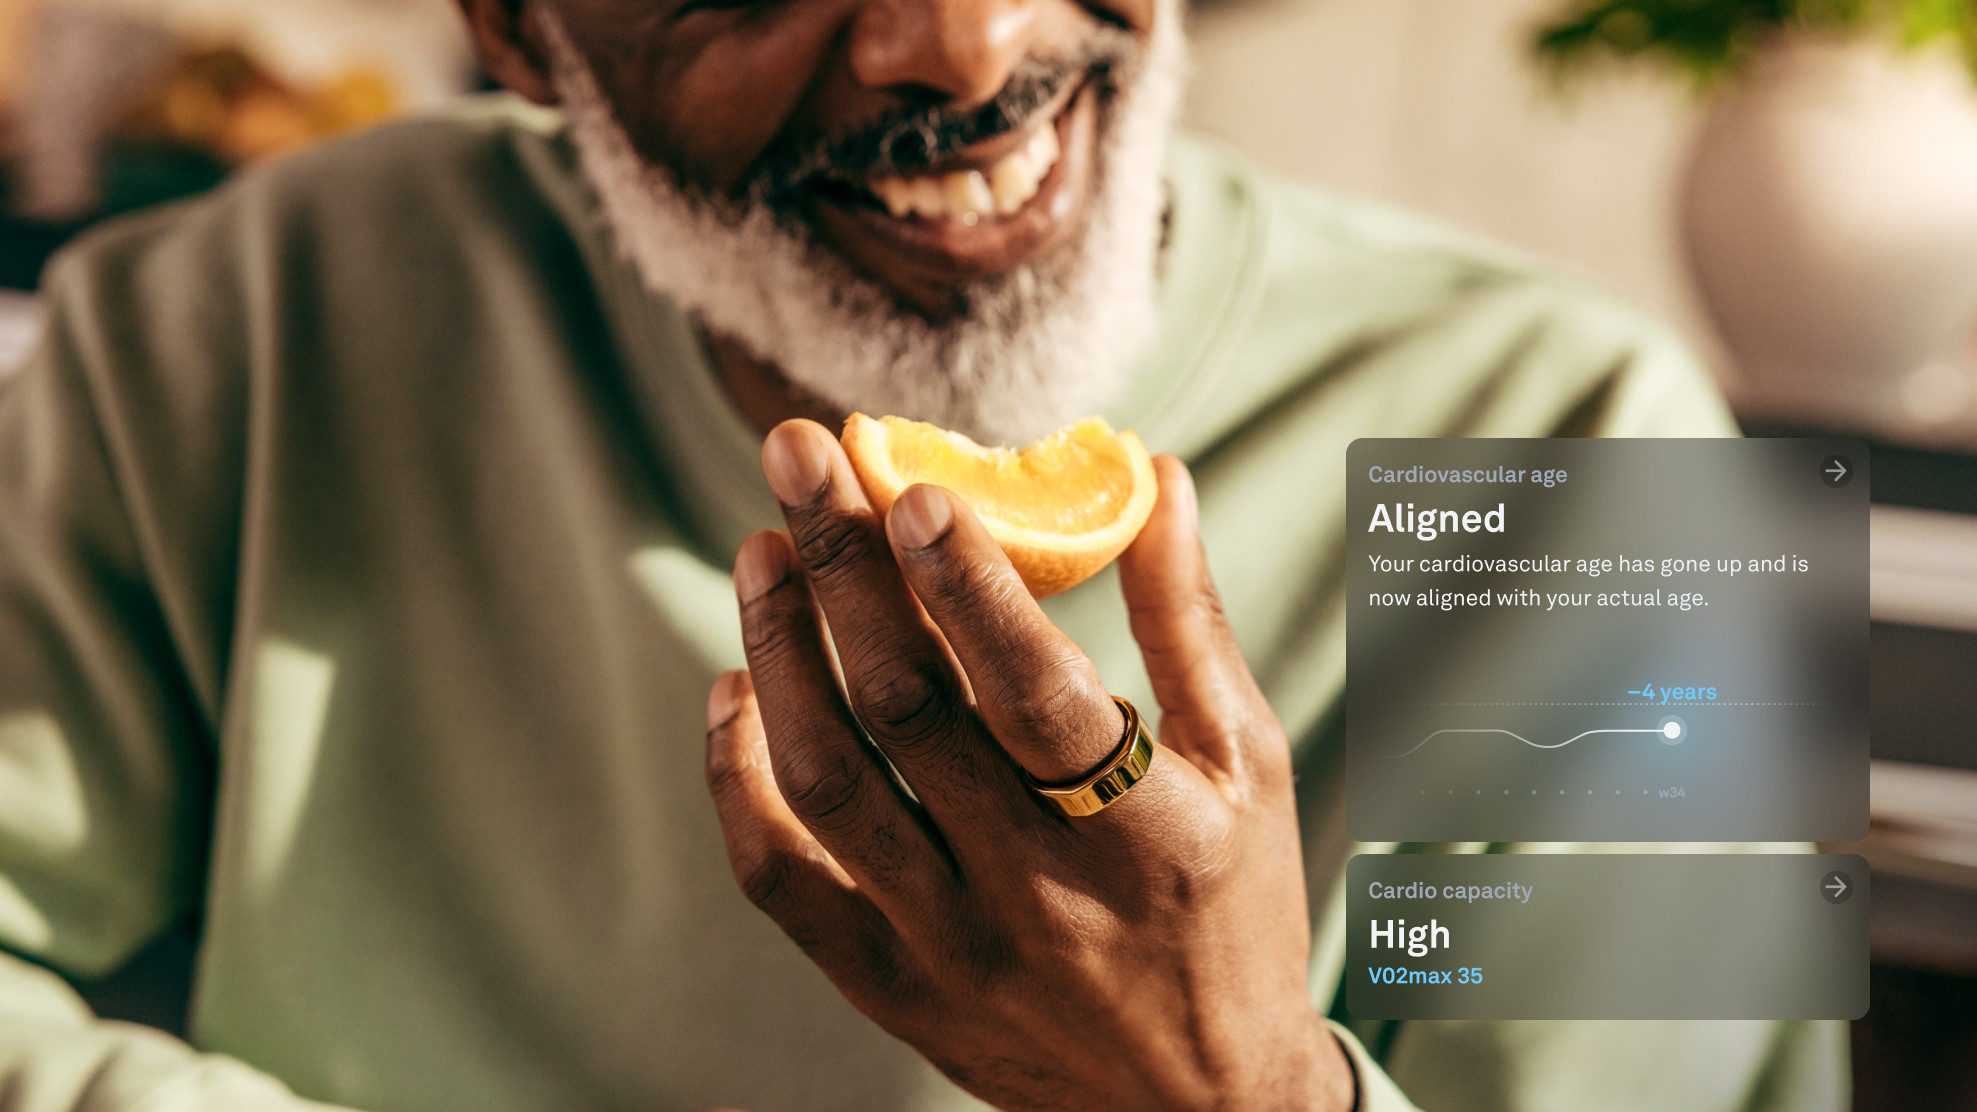 Oura heart health features shown next to a man wearing an Oura Ring and eating an orange slice